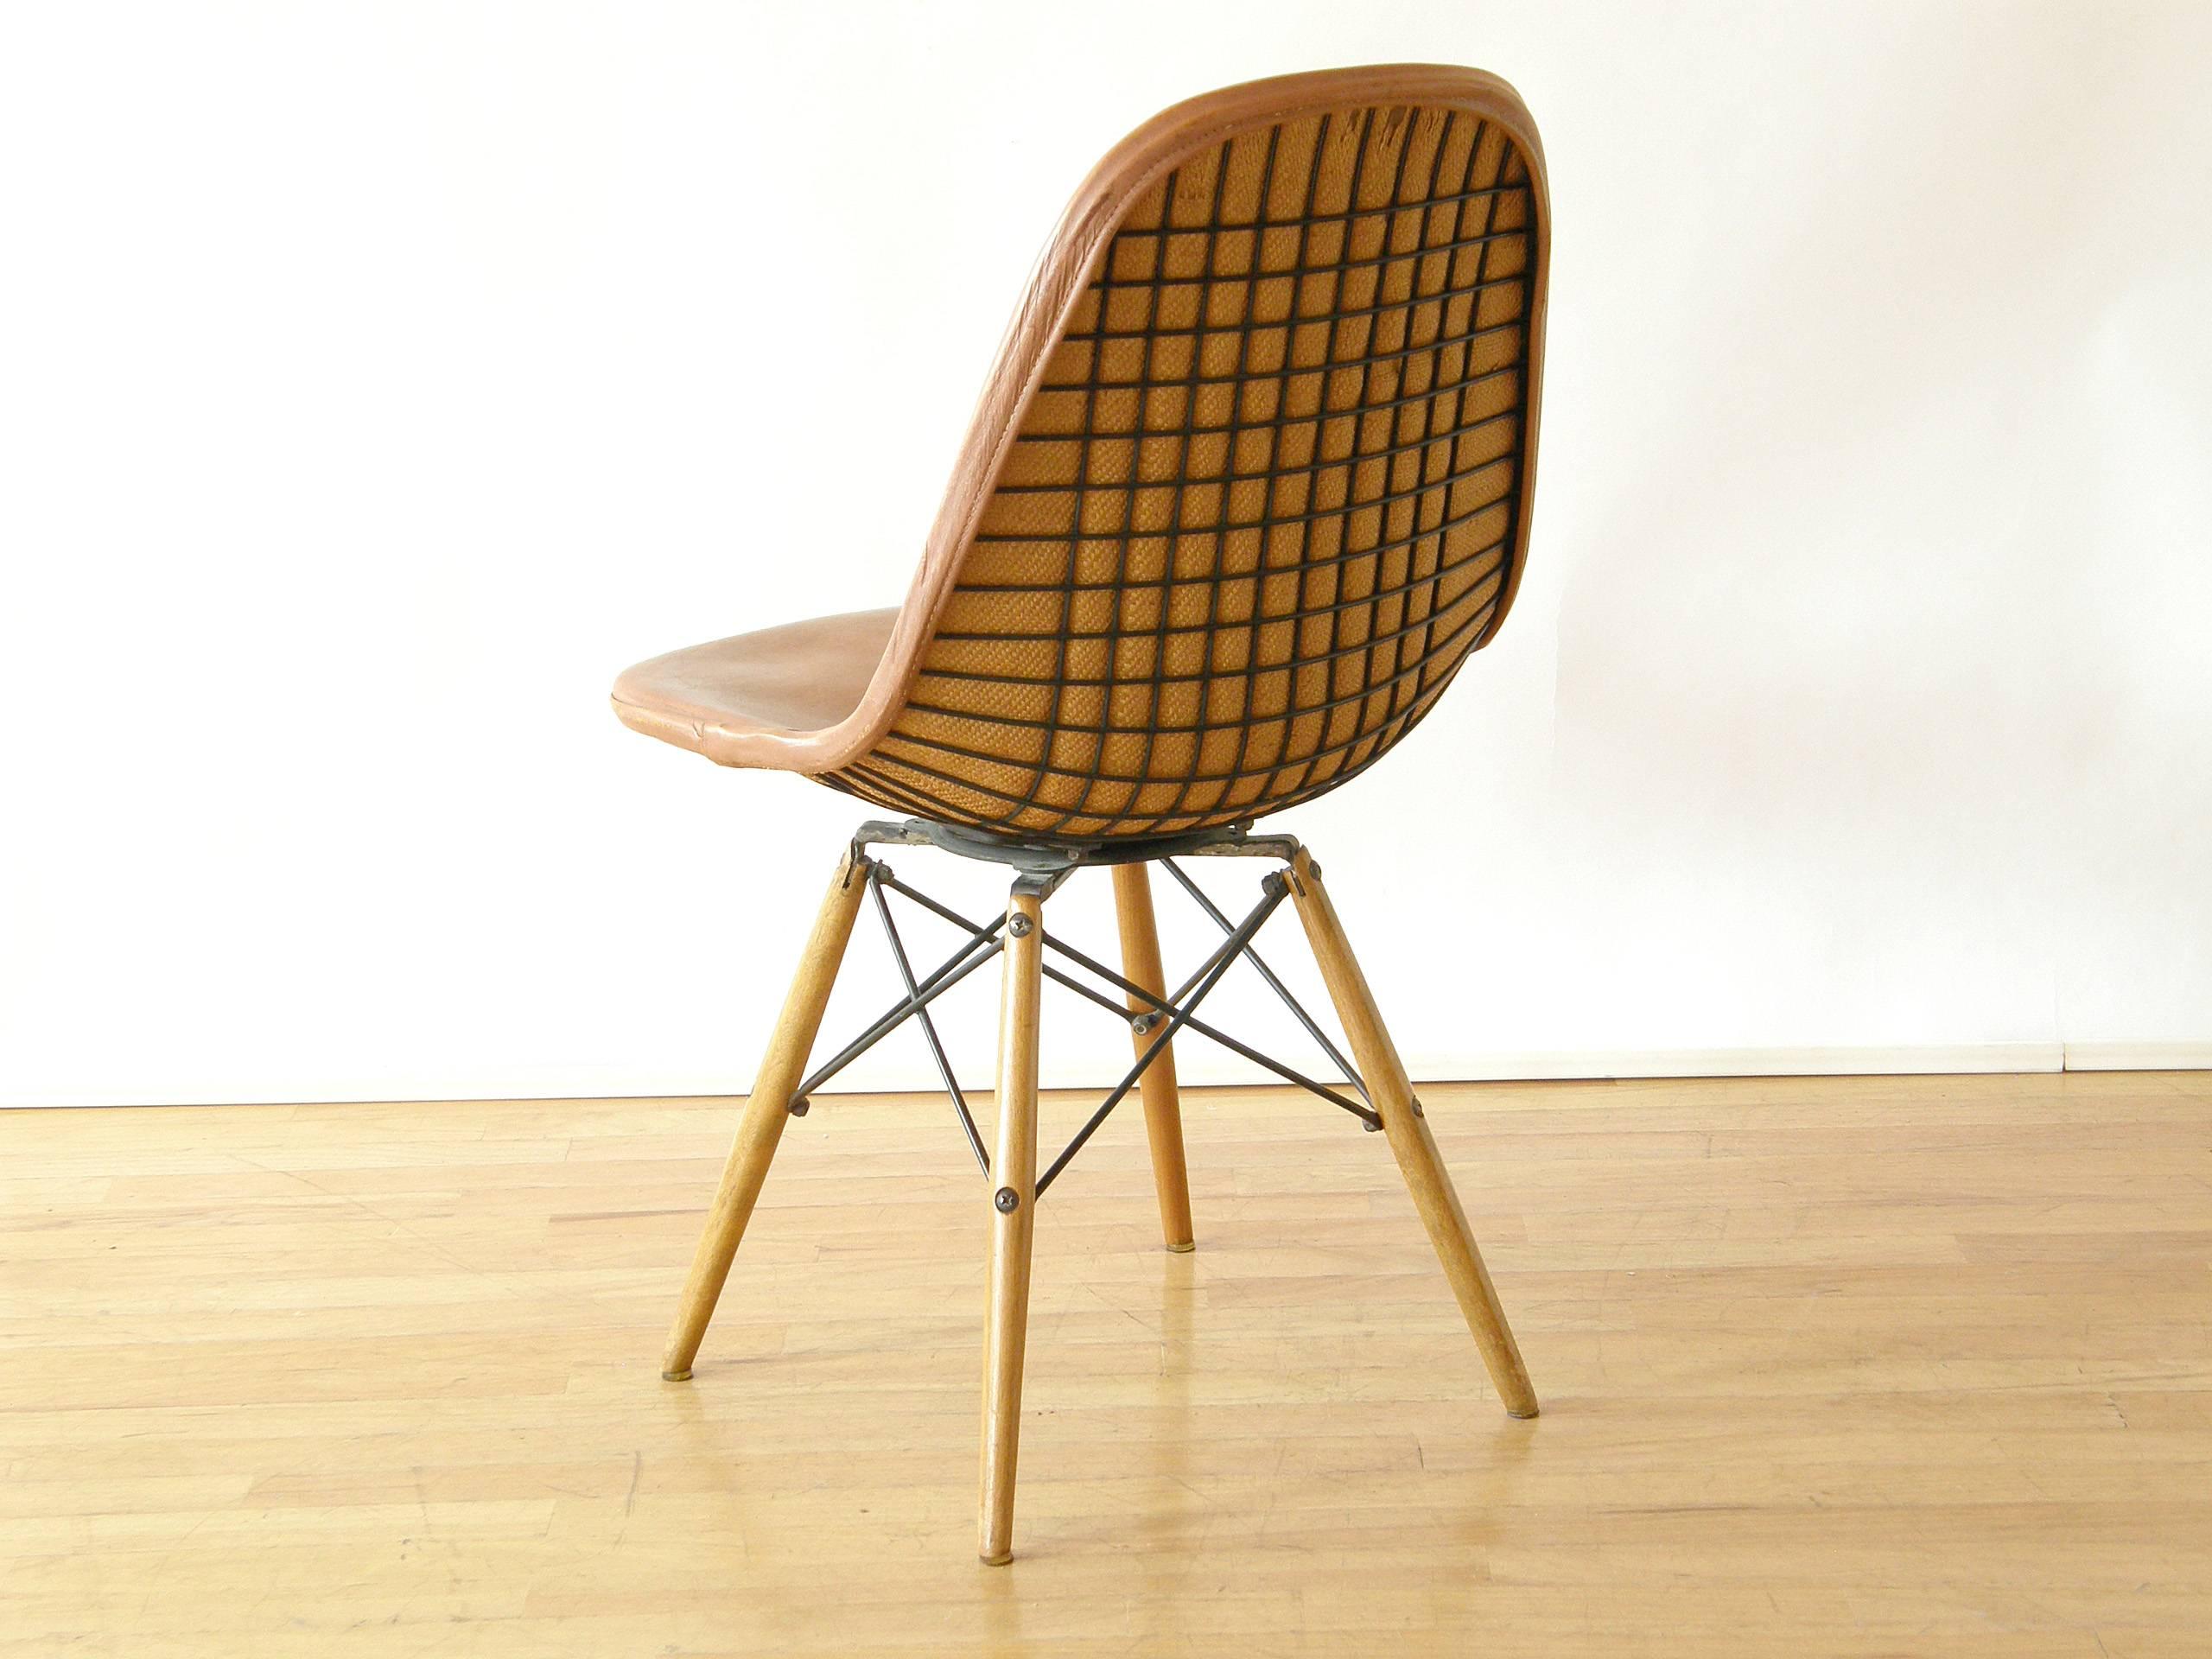 Swiveling, dowel leg chair with wire seat and original, burlap backed leather cover, designed by Charles and Ray Eames.

Please use 